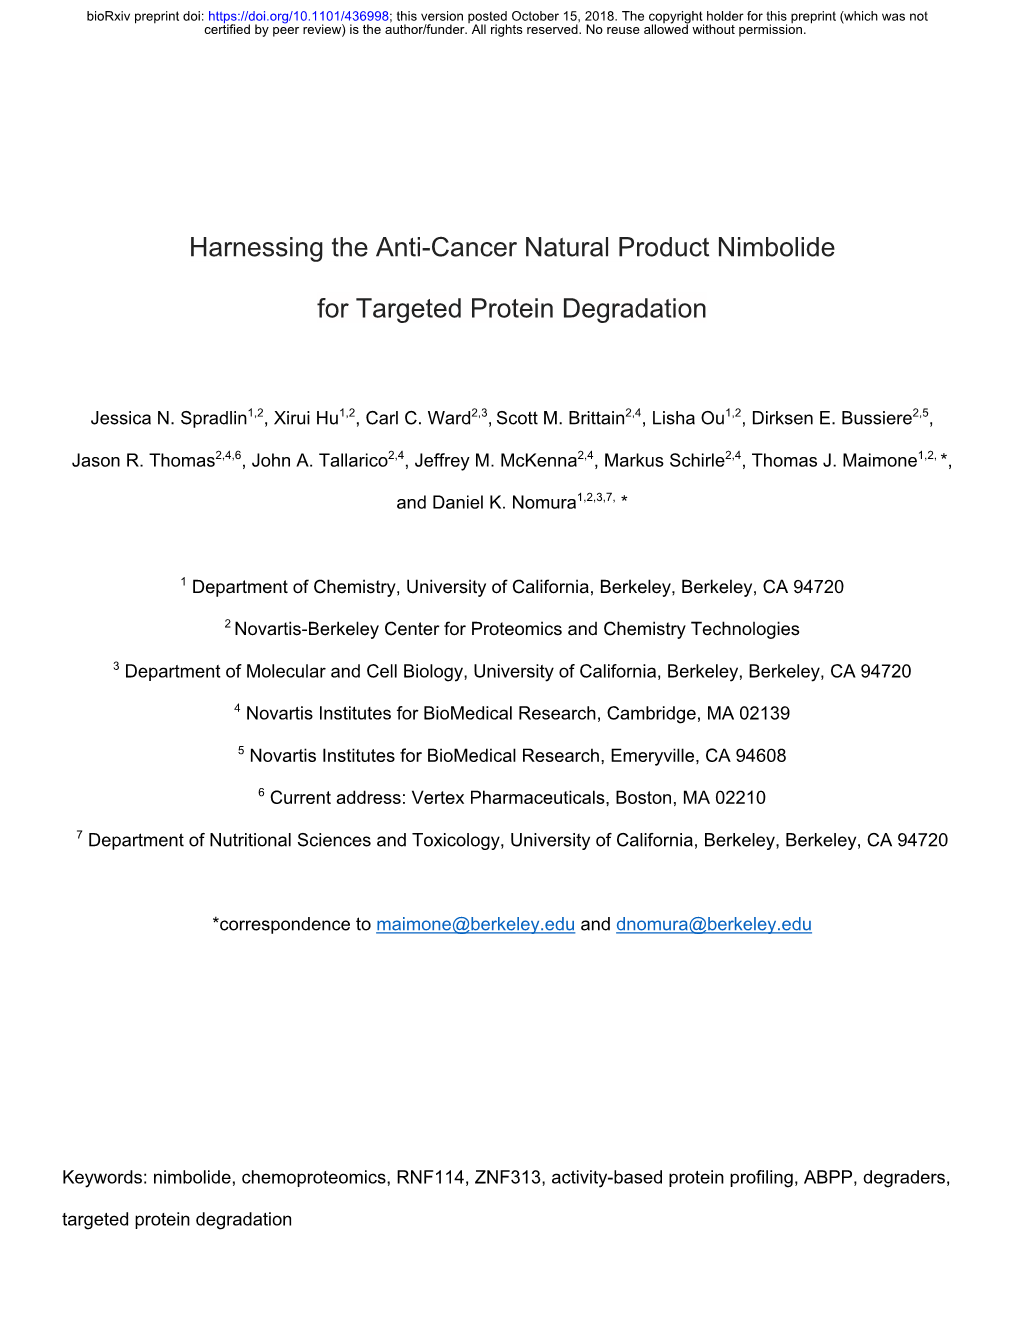 Harnessing the Anti-Cancer Natural Product Nimbolide for Targeted